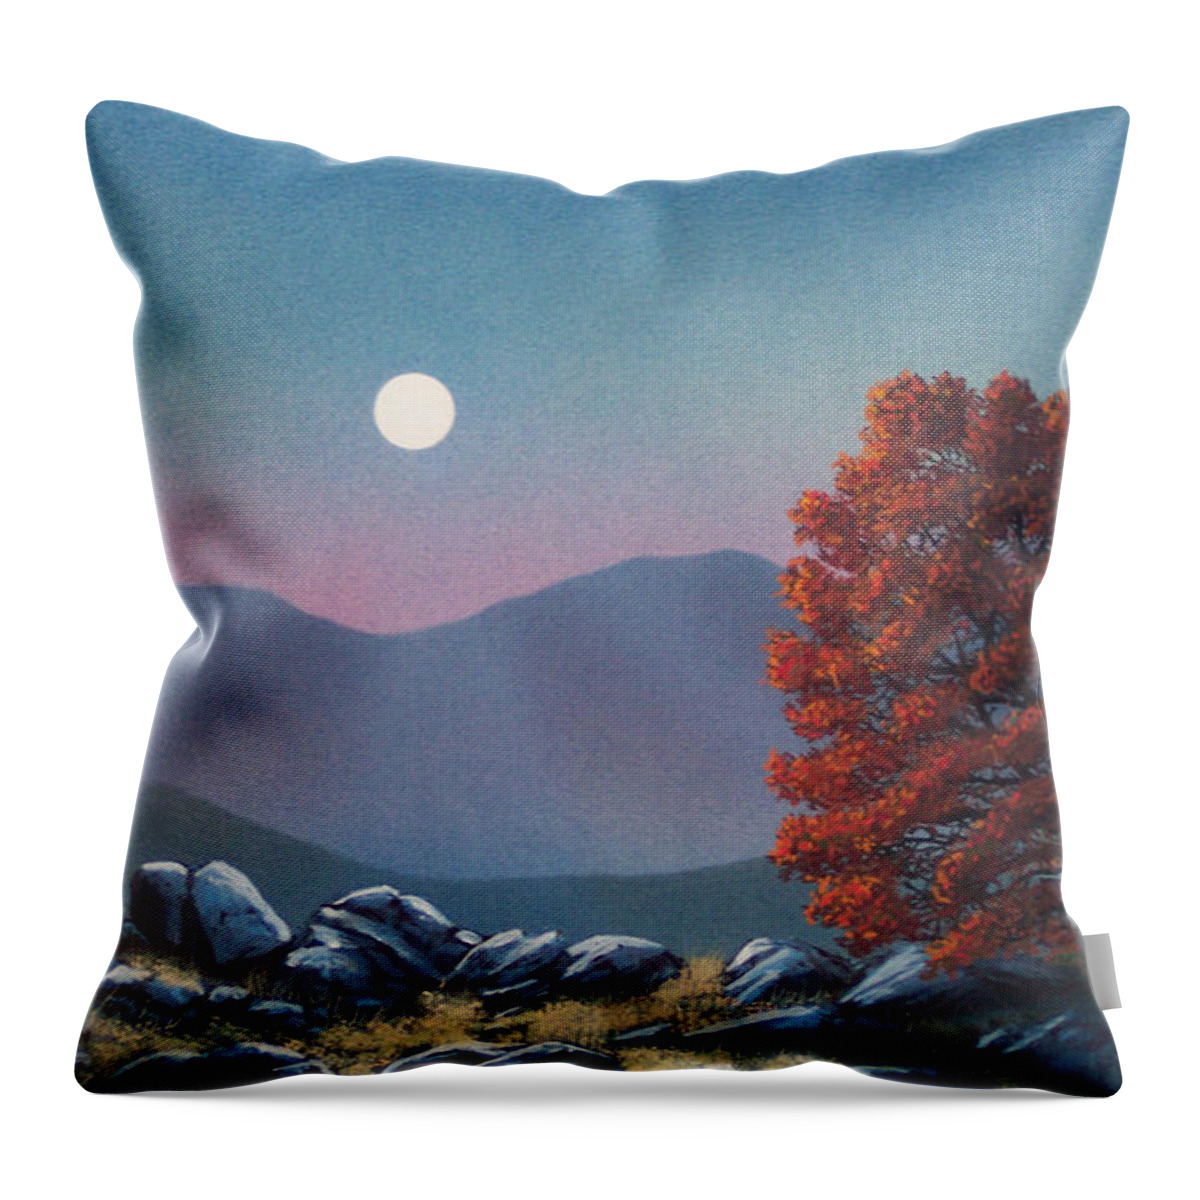 Landscape Throw Pillow featuring the painting Lonely Sentinel Tree by Frank Wilson